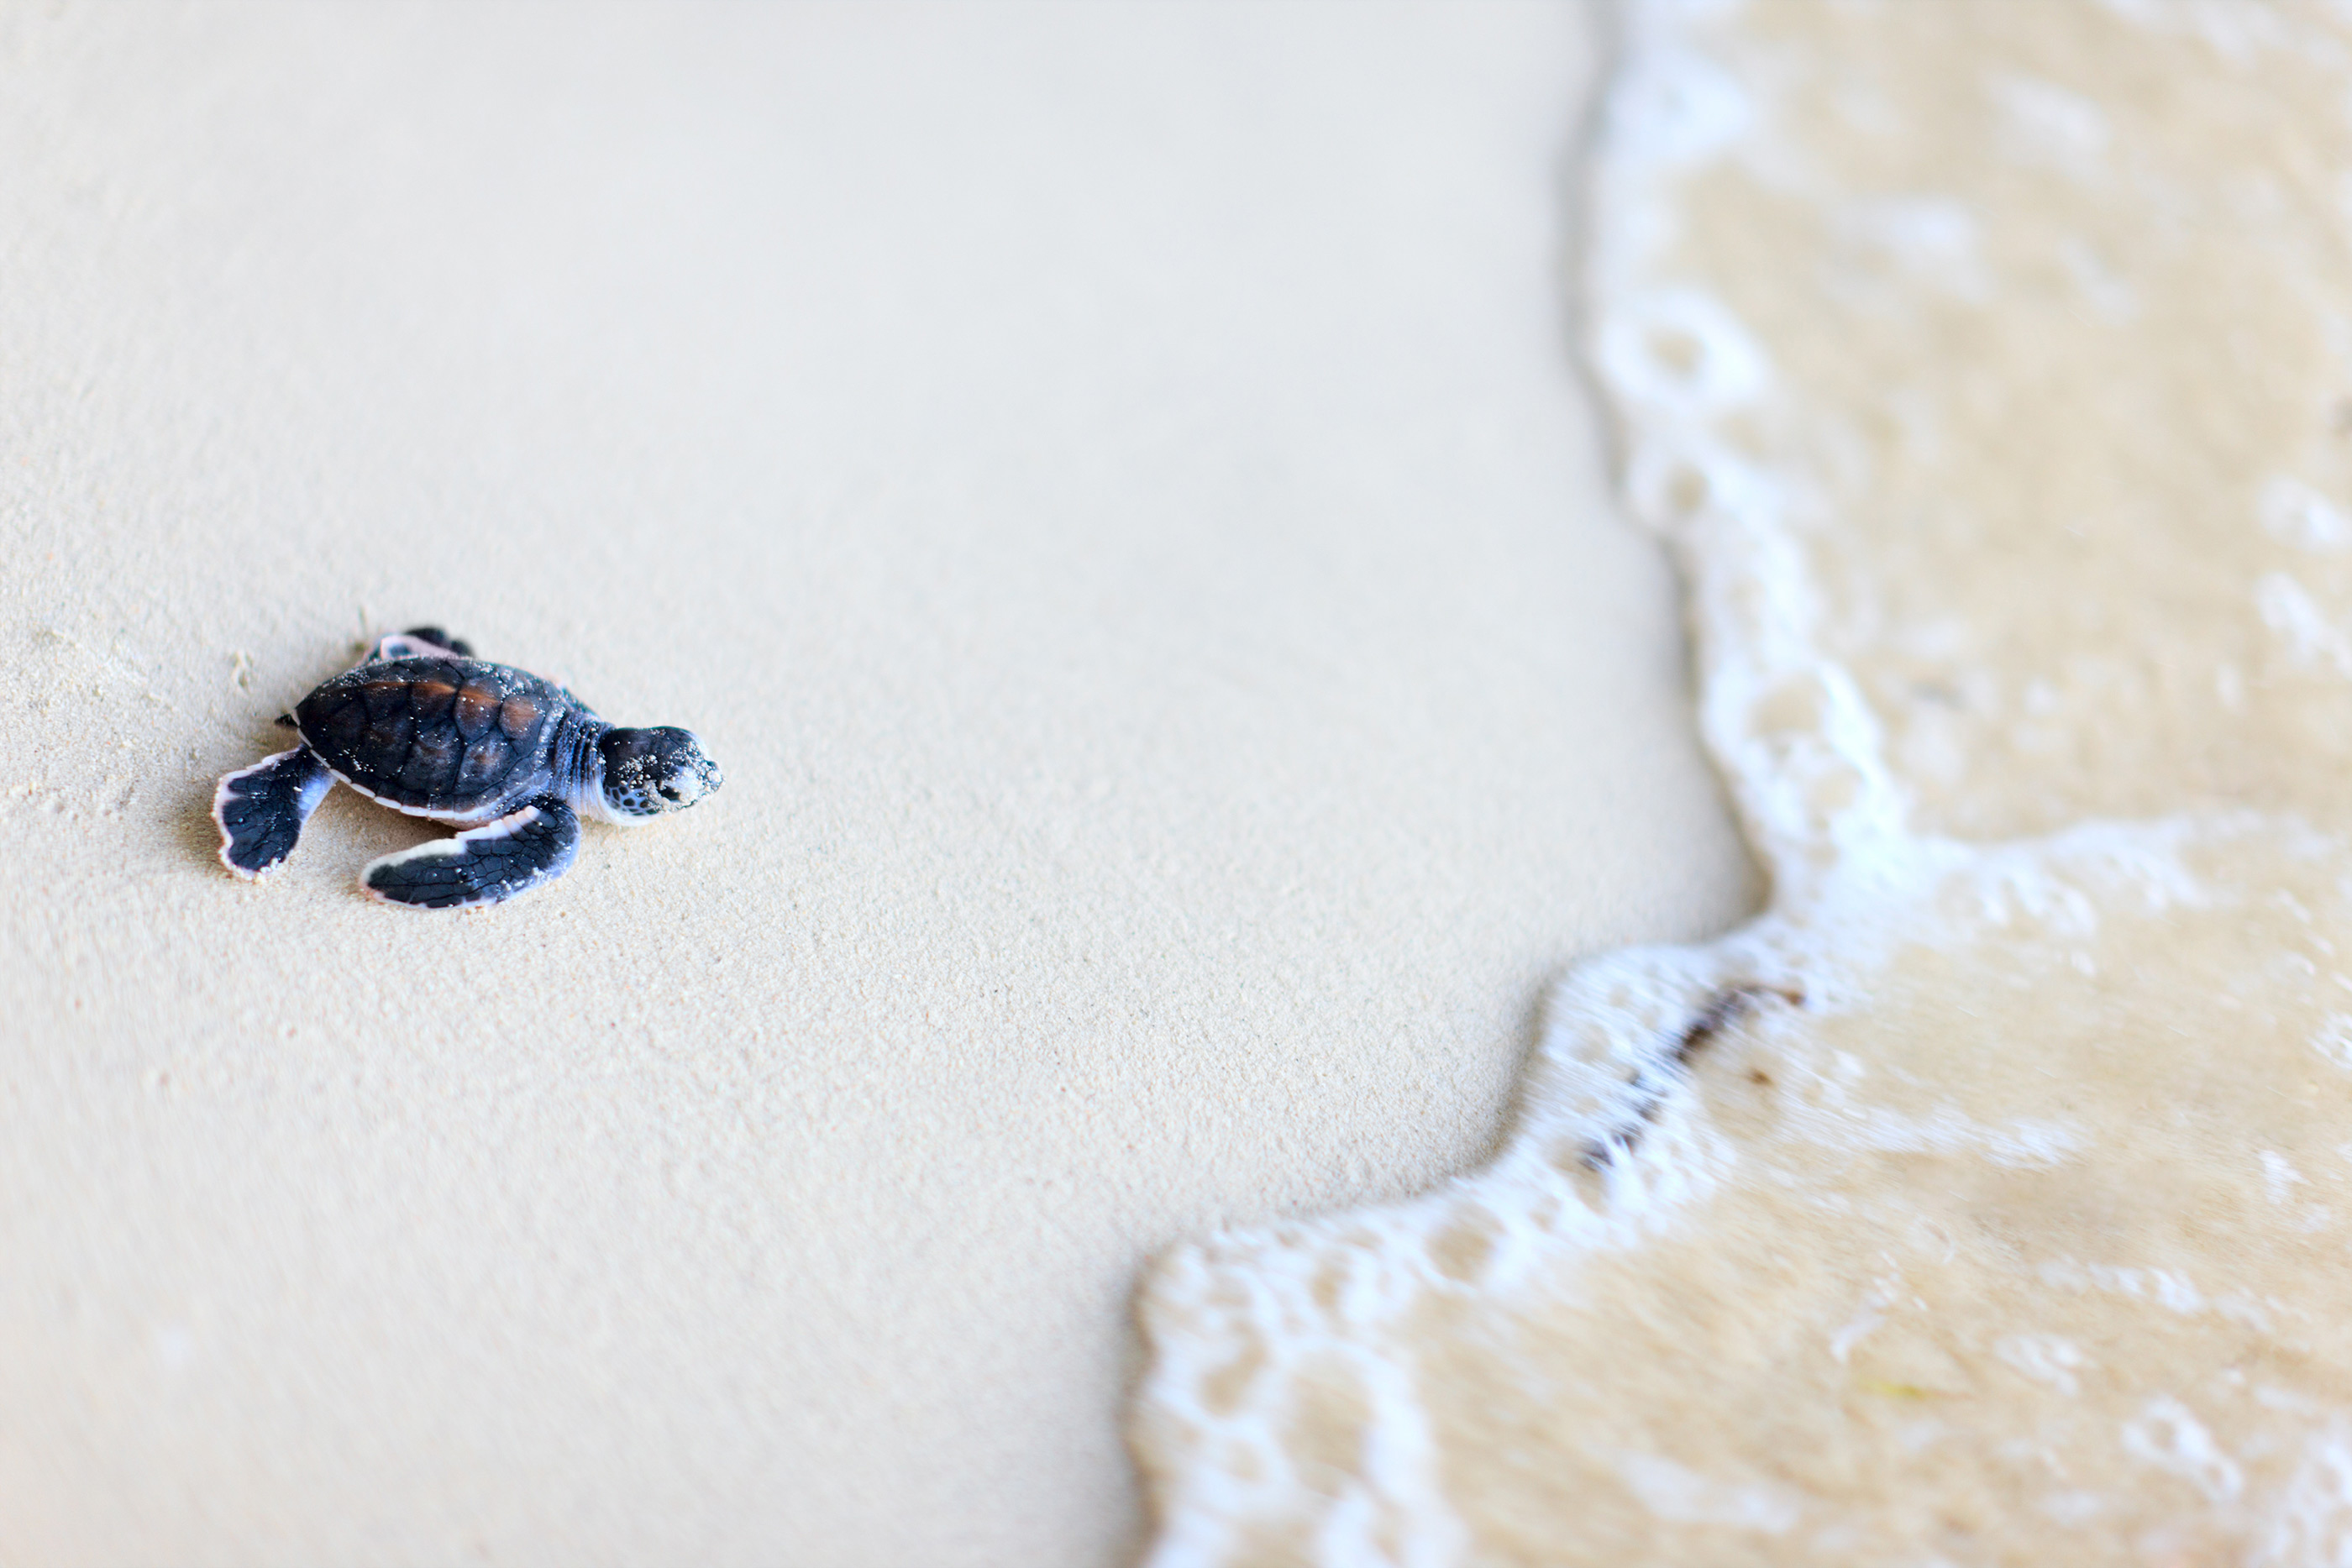 Sea Turtle Protection | Collier County Parks & Recreation